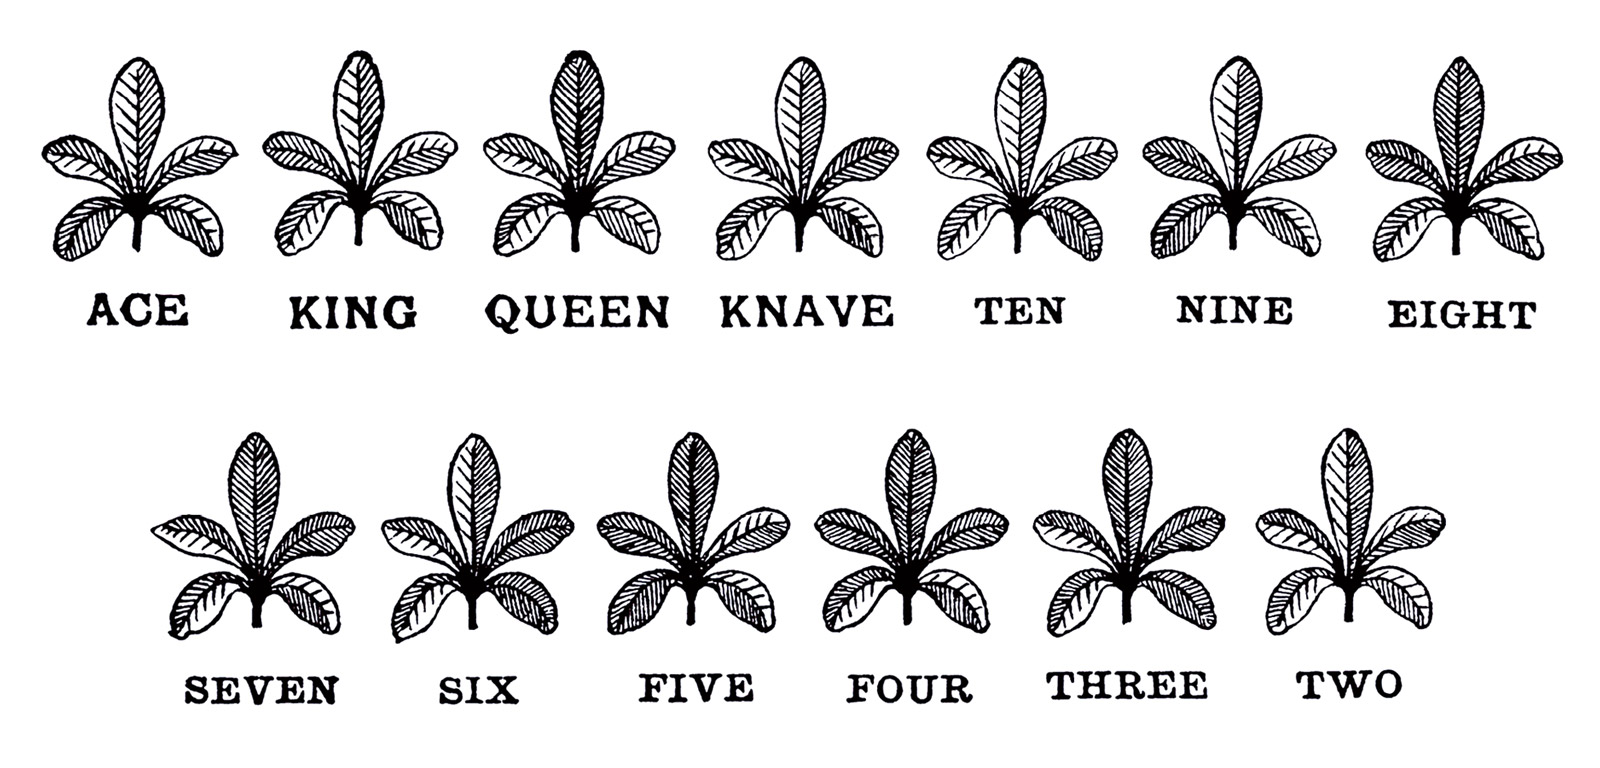 A code for the system used to mark the card in the previous image. It features multiple examples of varyingly shaded leaves. 